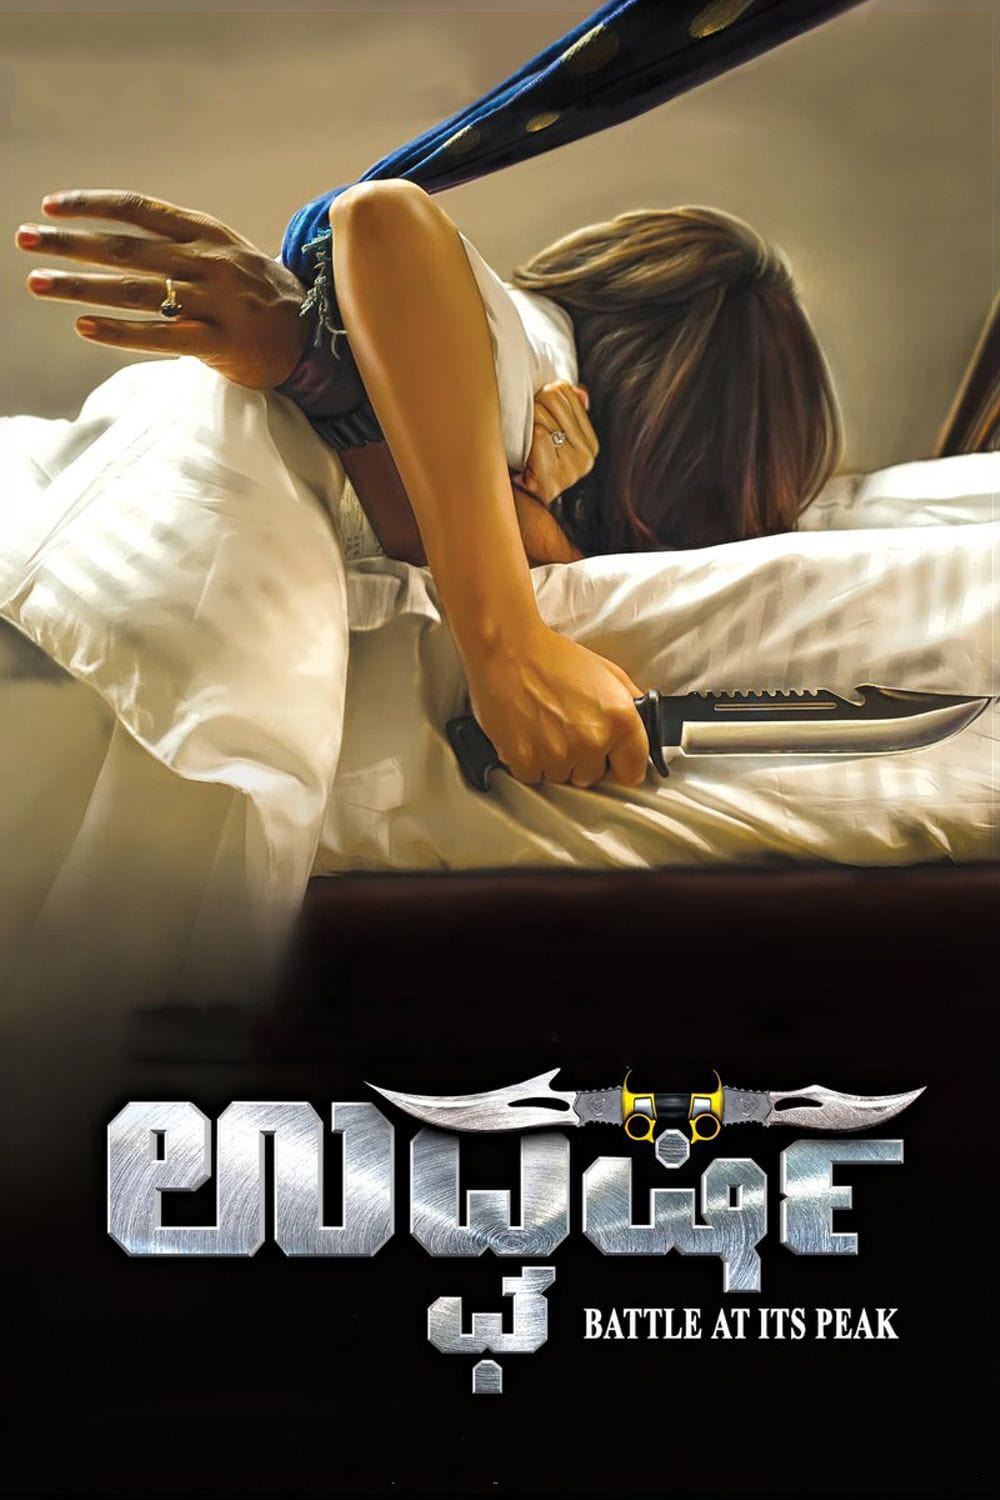 Poster for the movie "Udgharsha"